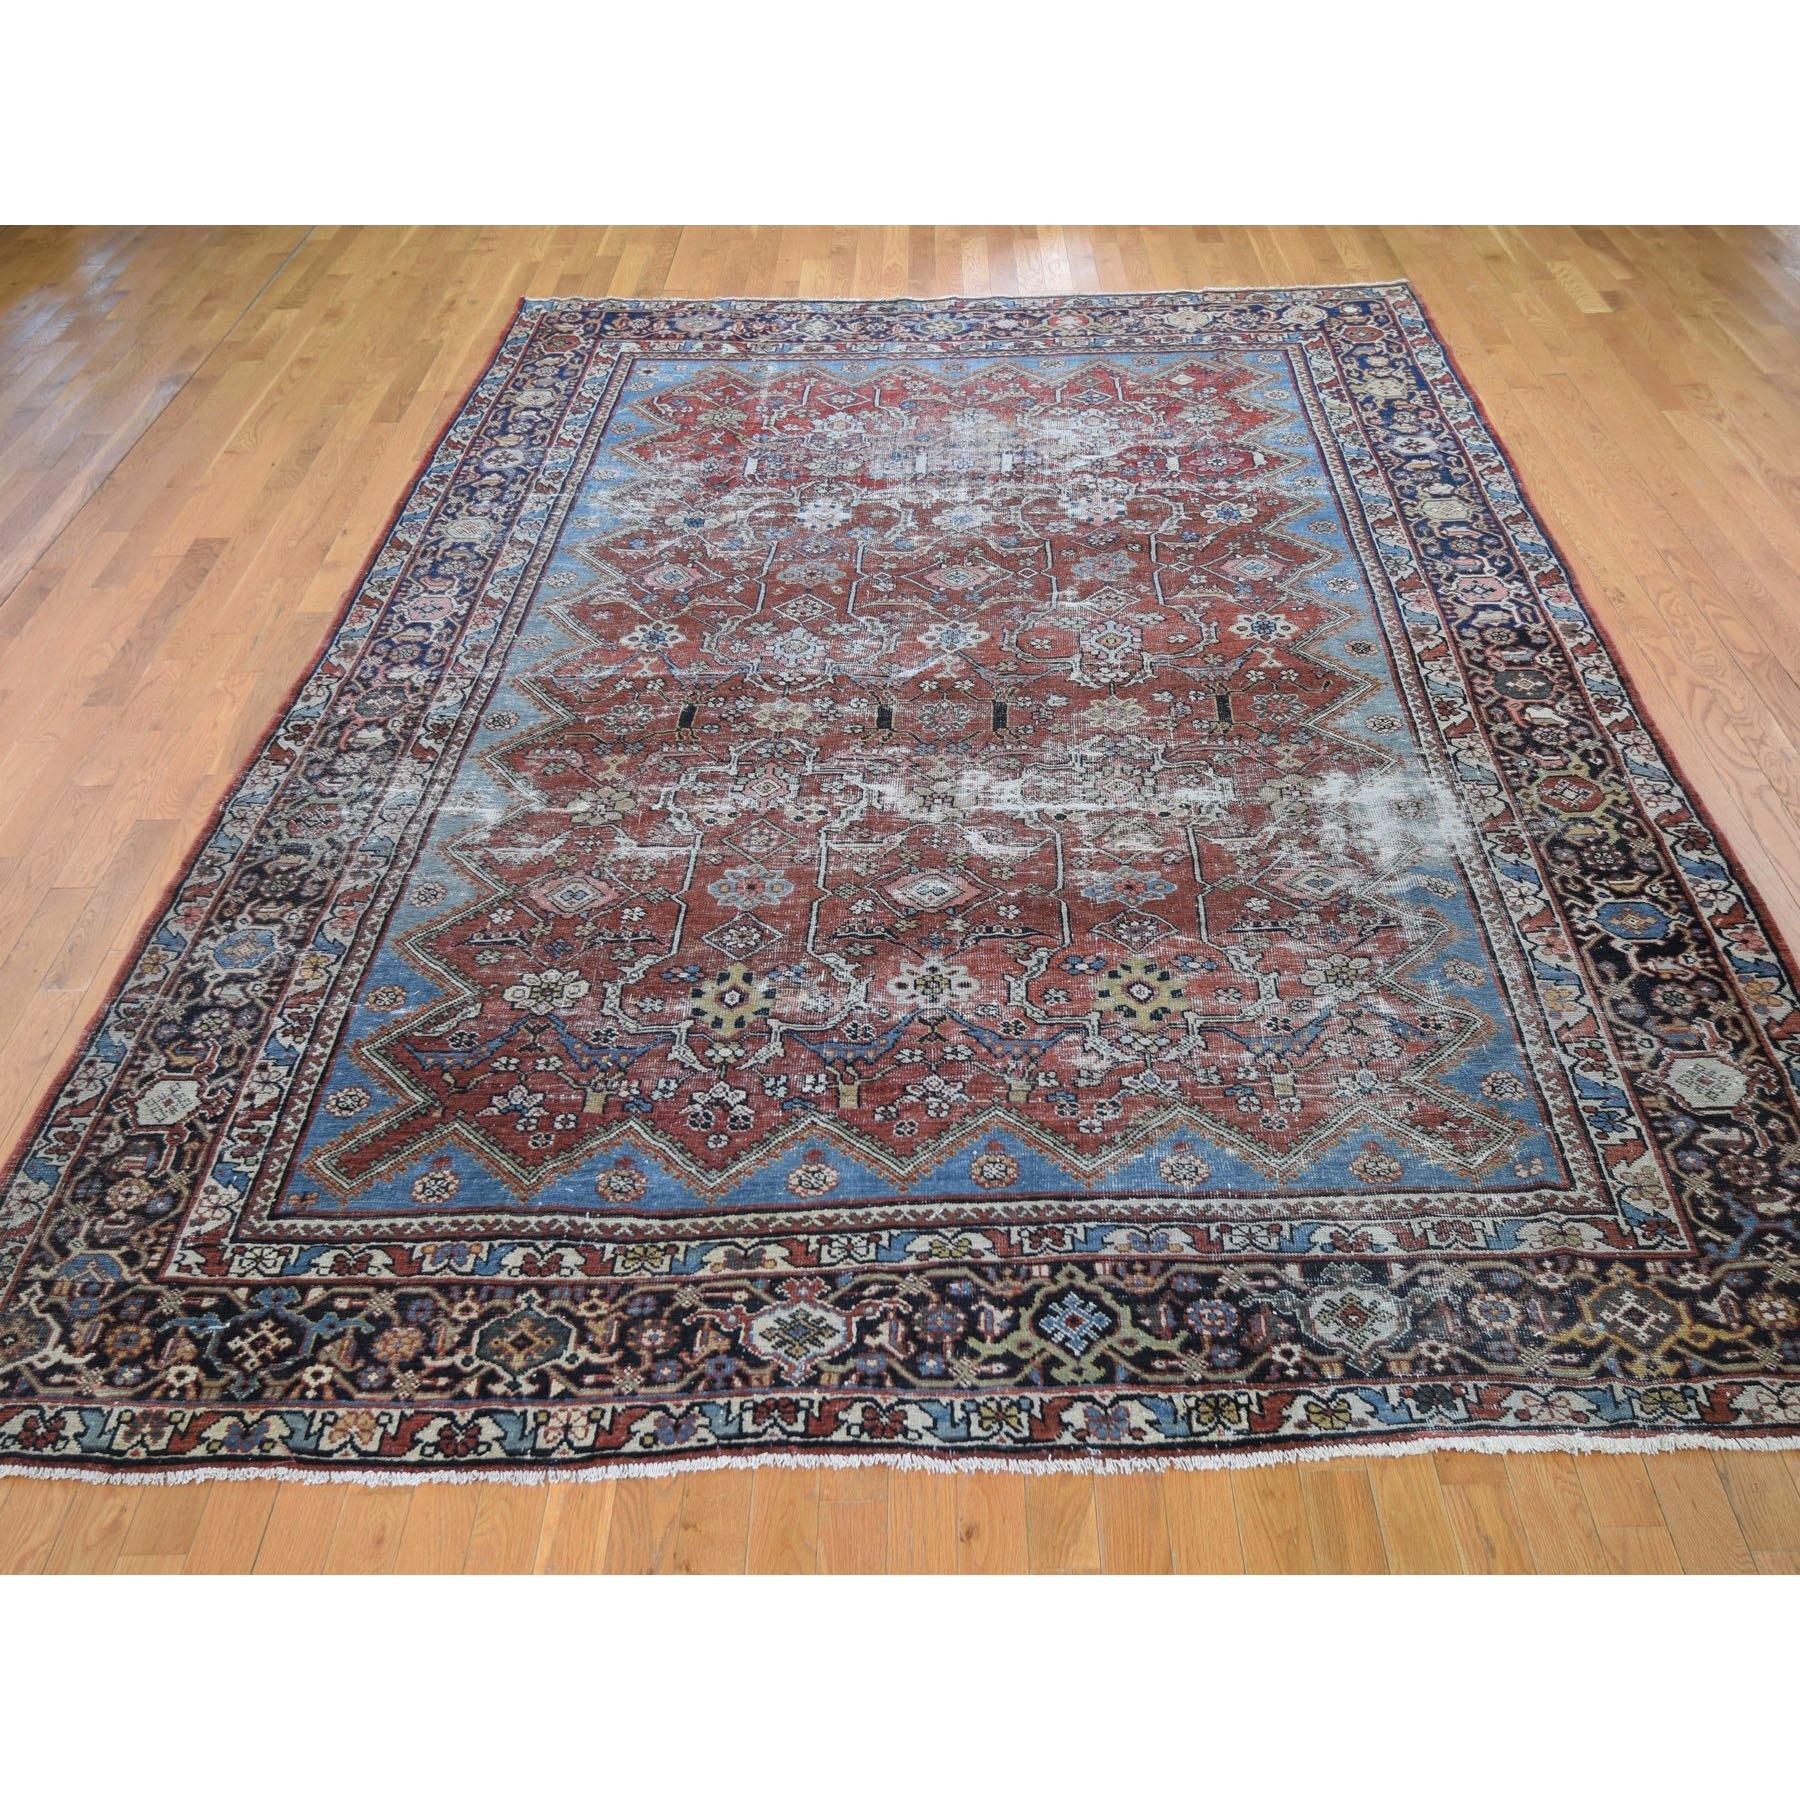 Hollywood Regency Red Antique Worn Persian Mahal Clean Hand Knotted Oriental Rug